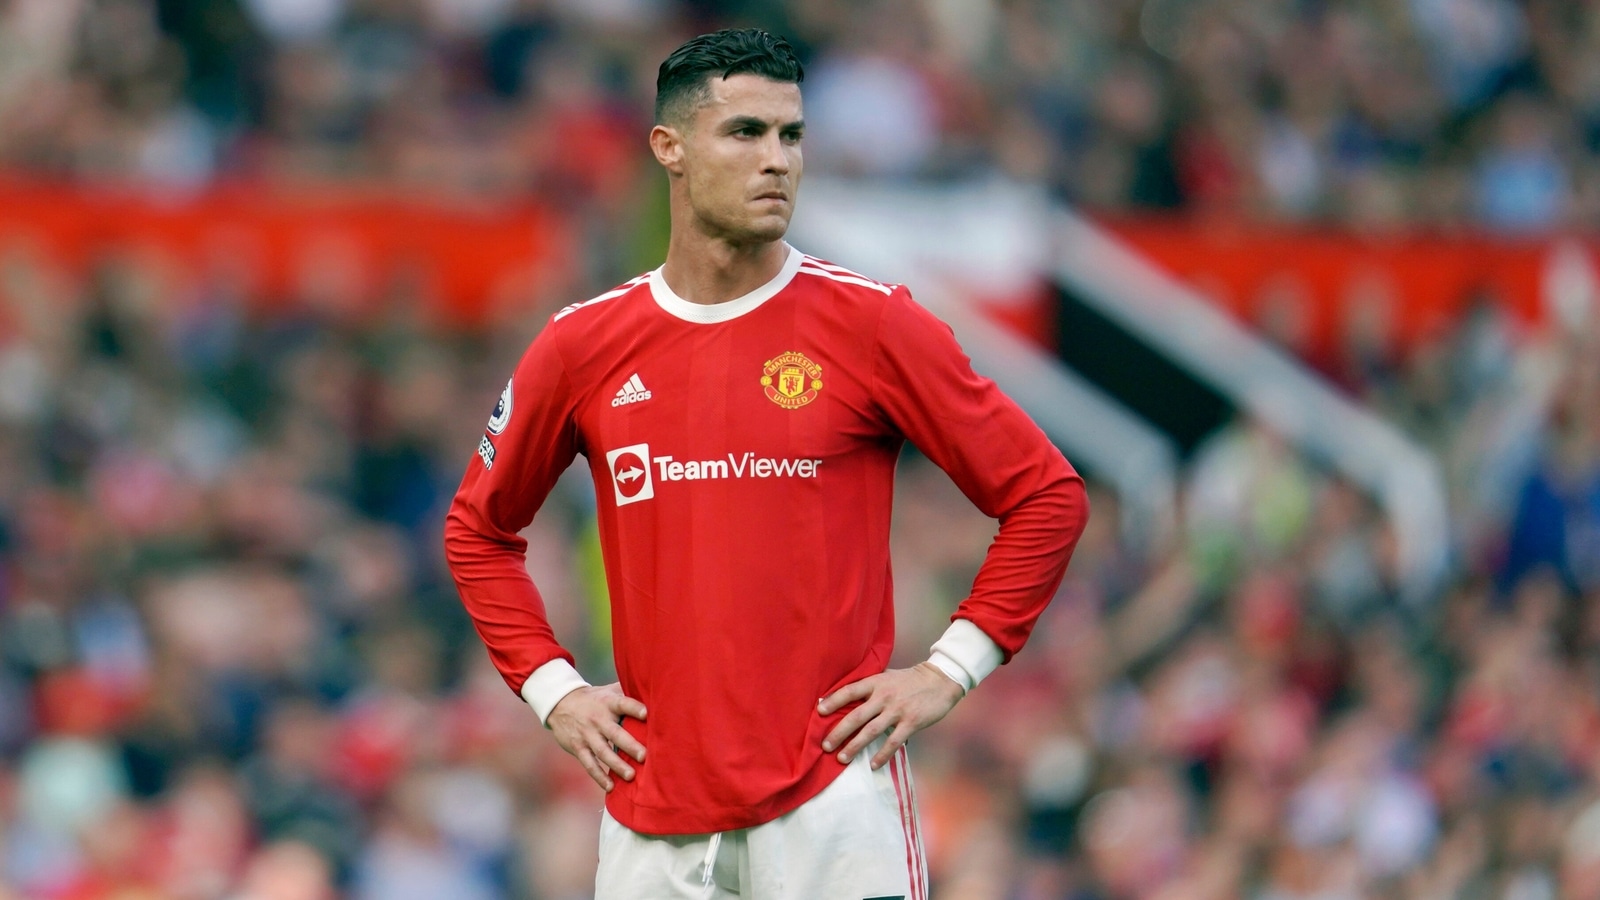 Cristiano Ronaldo: Spartak Moscow post savage meme to troll Manchester United star amid fruitless search for new club